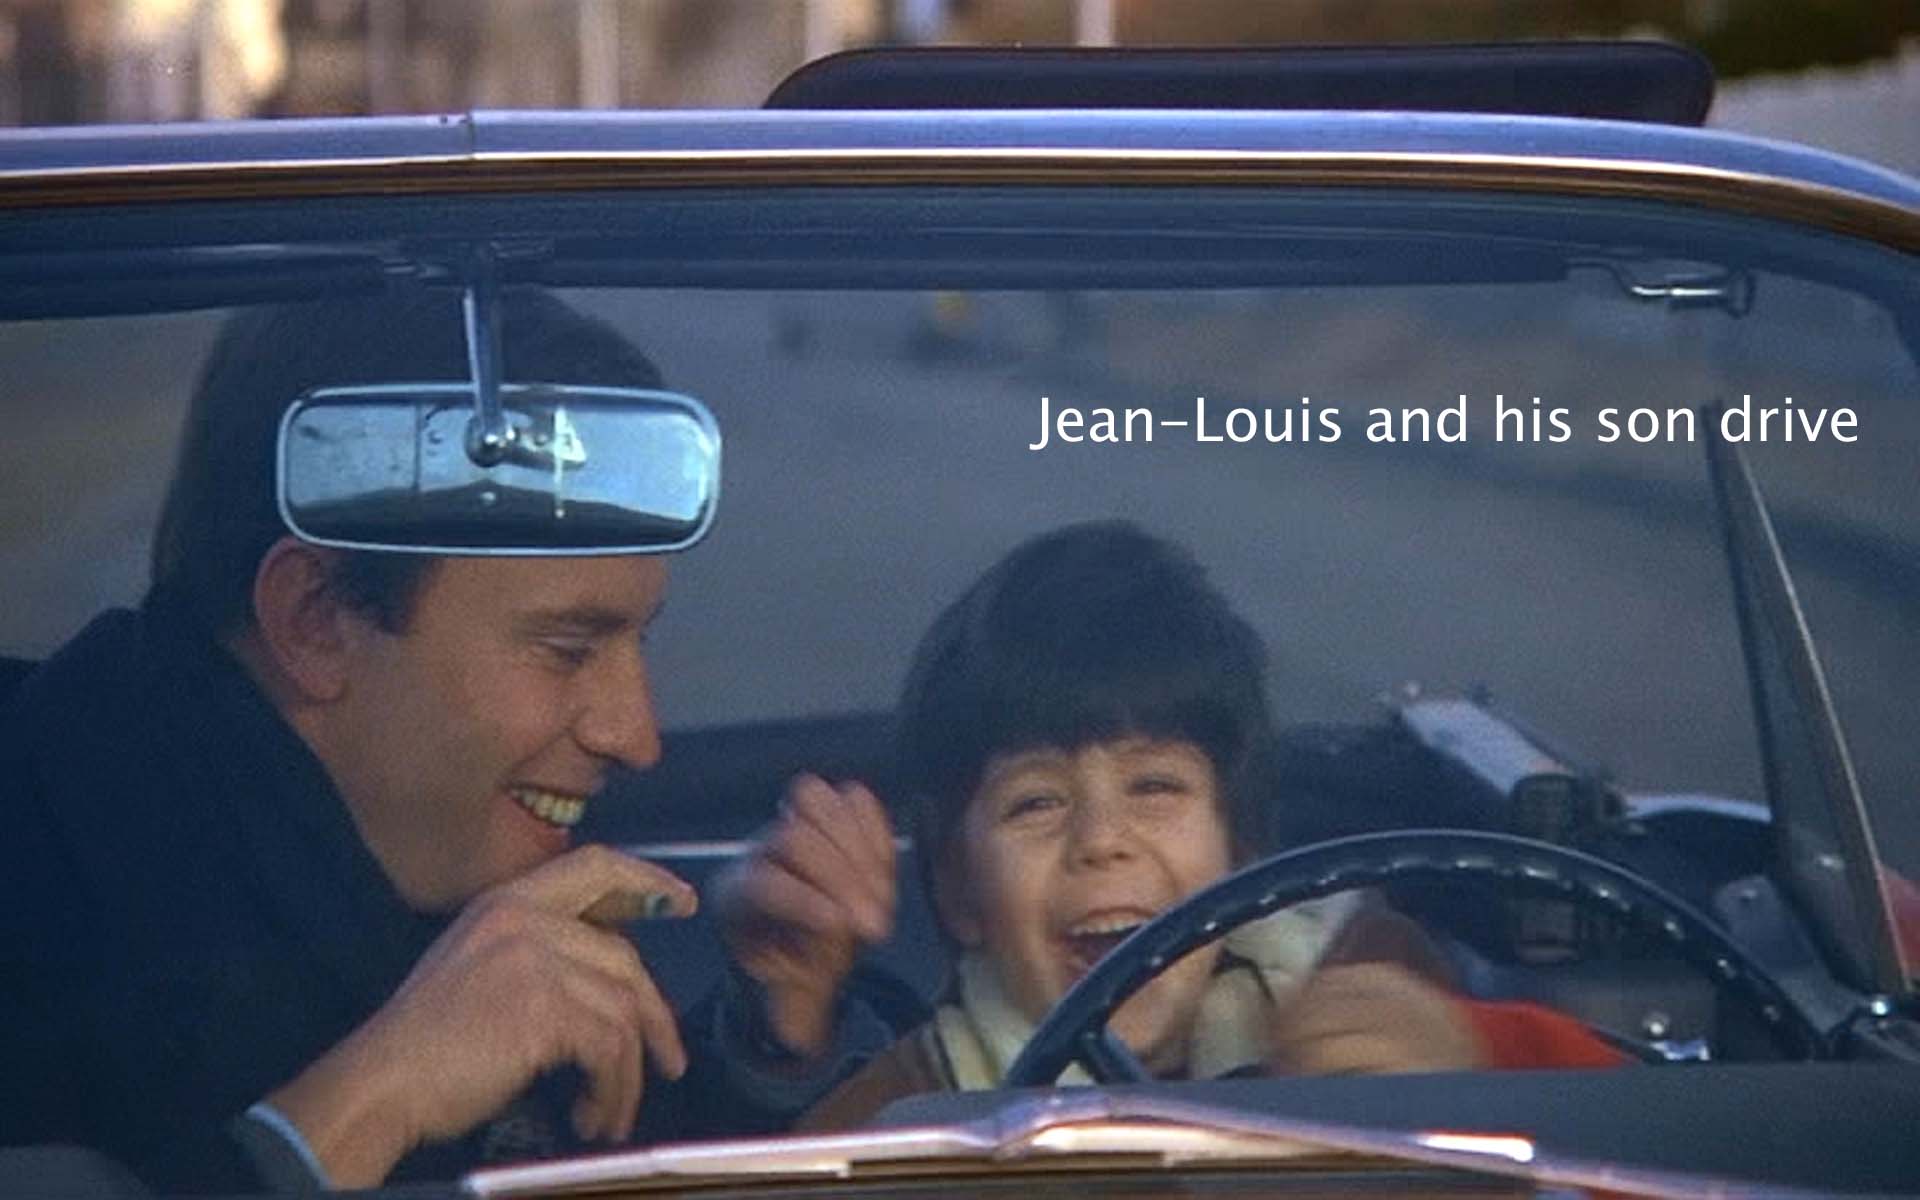 Jean-Louis and his son drive